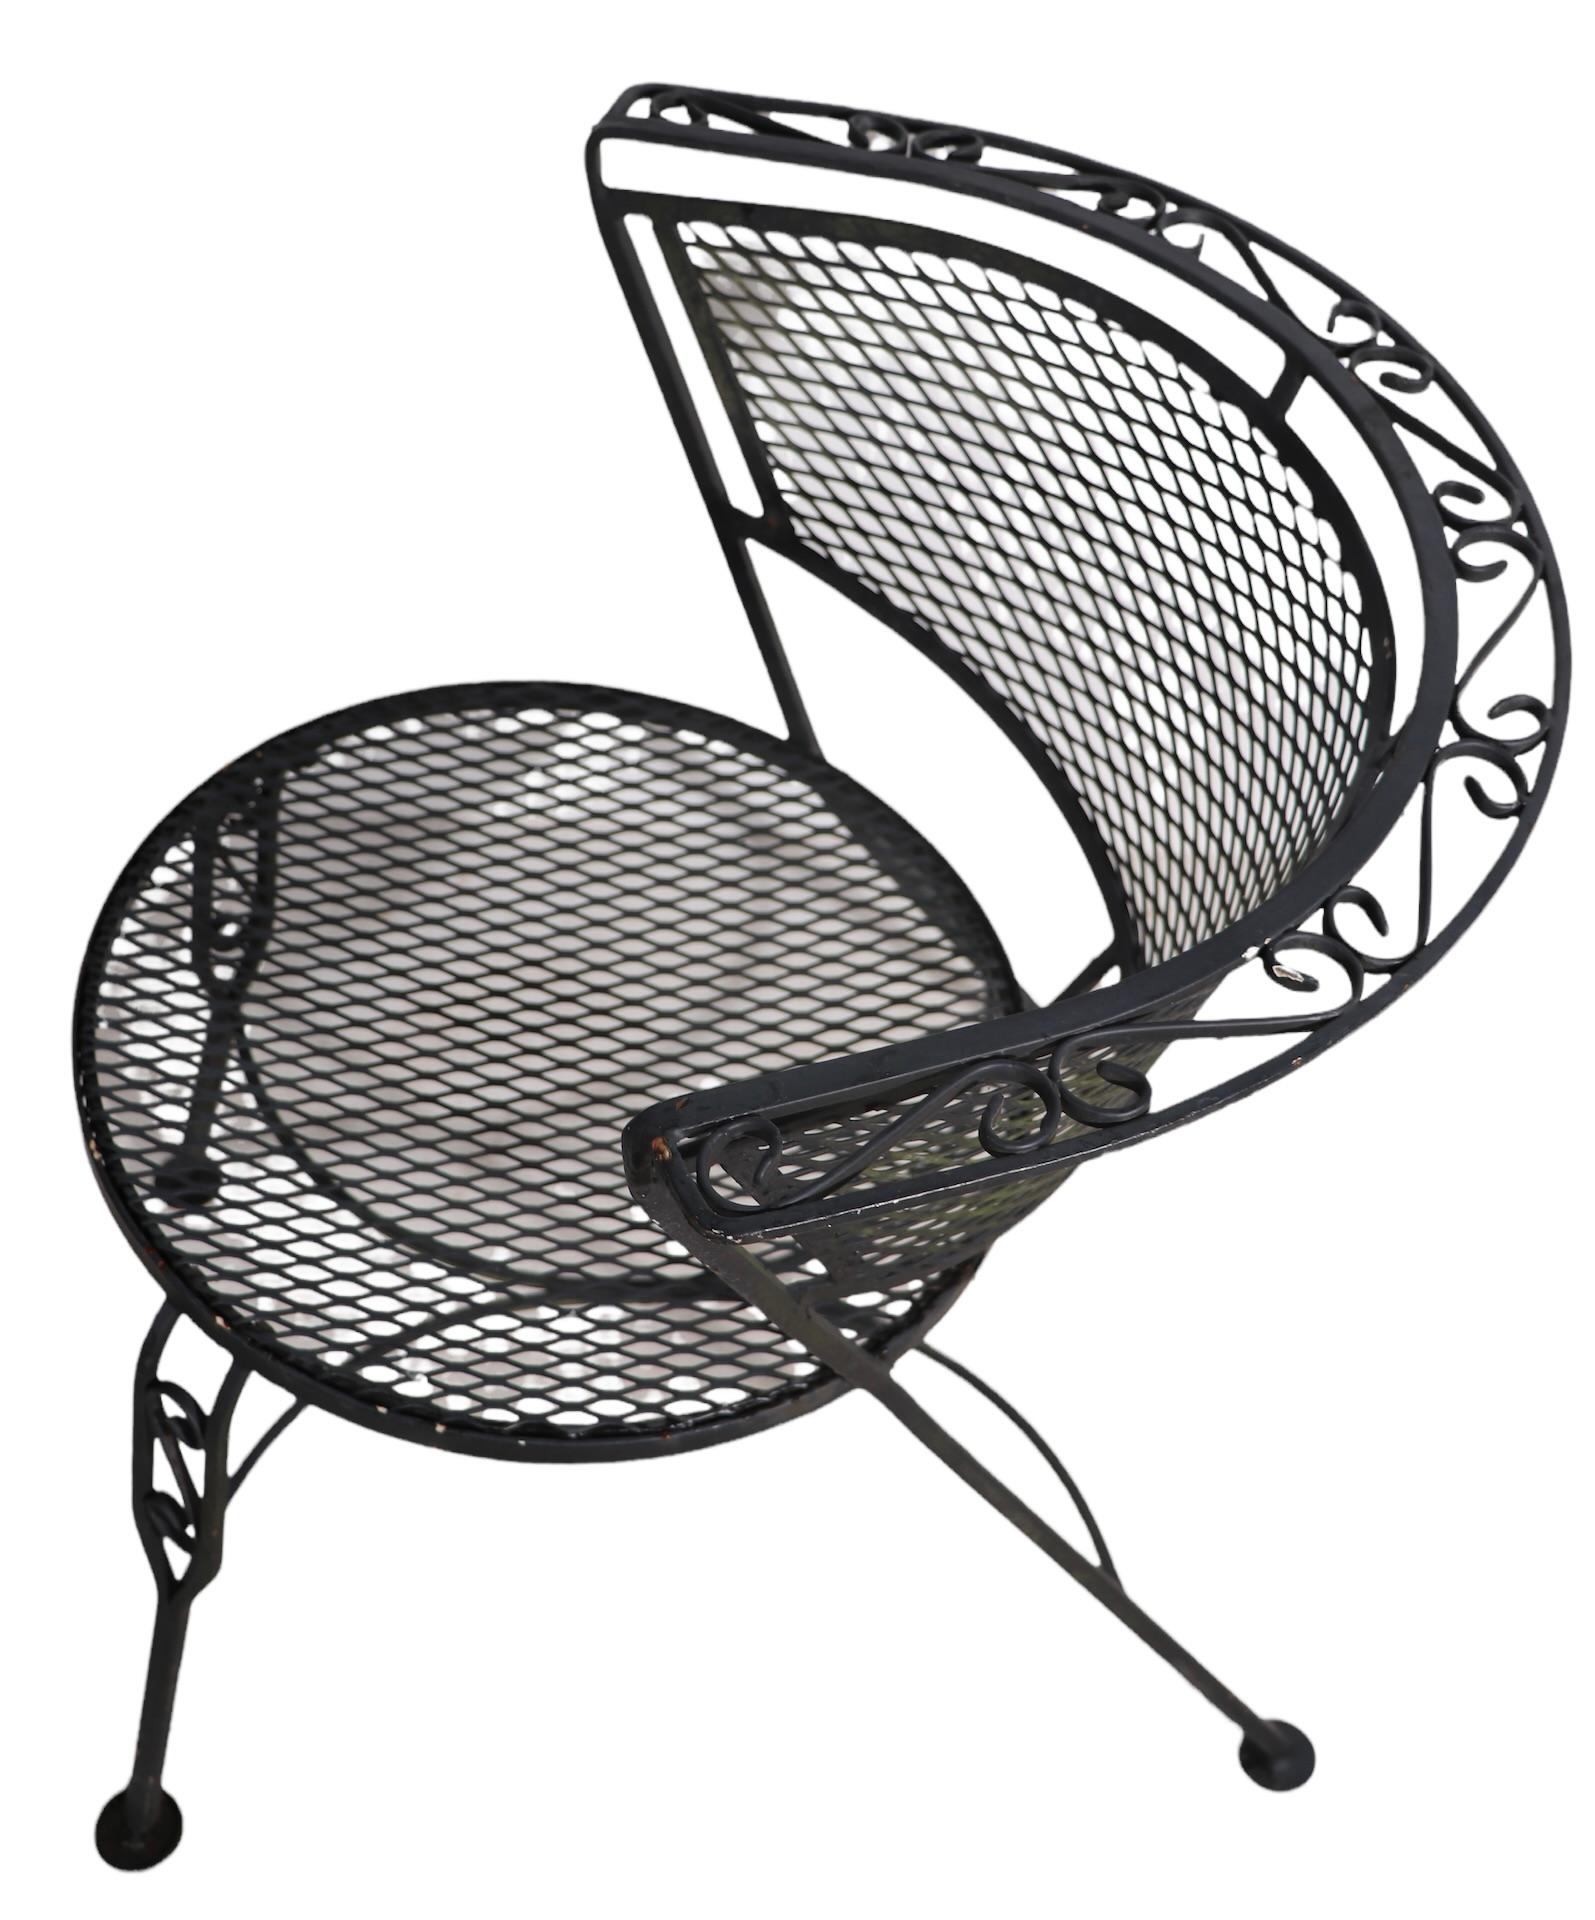 Mid-Century Modern Pr. Decorative Garden Patio Poolside Wrought Iron Chairs by Woodard For Sale